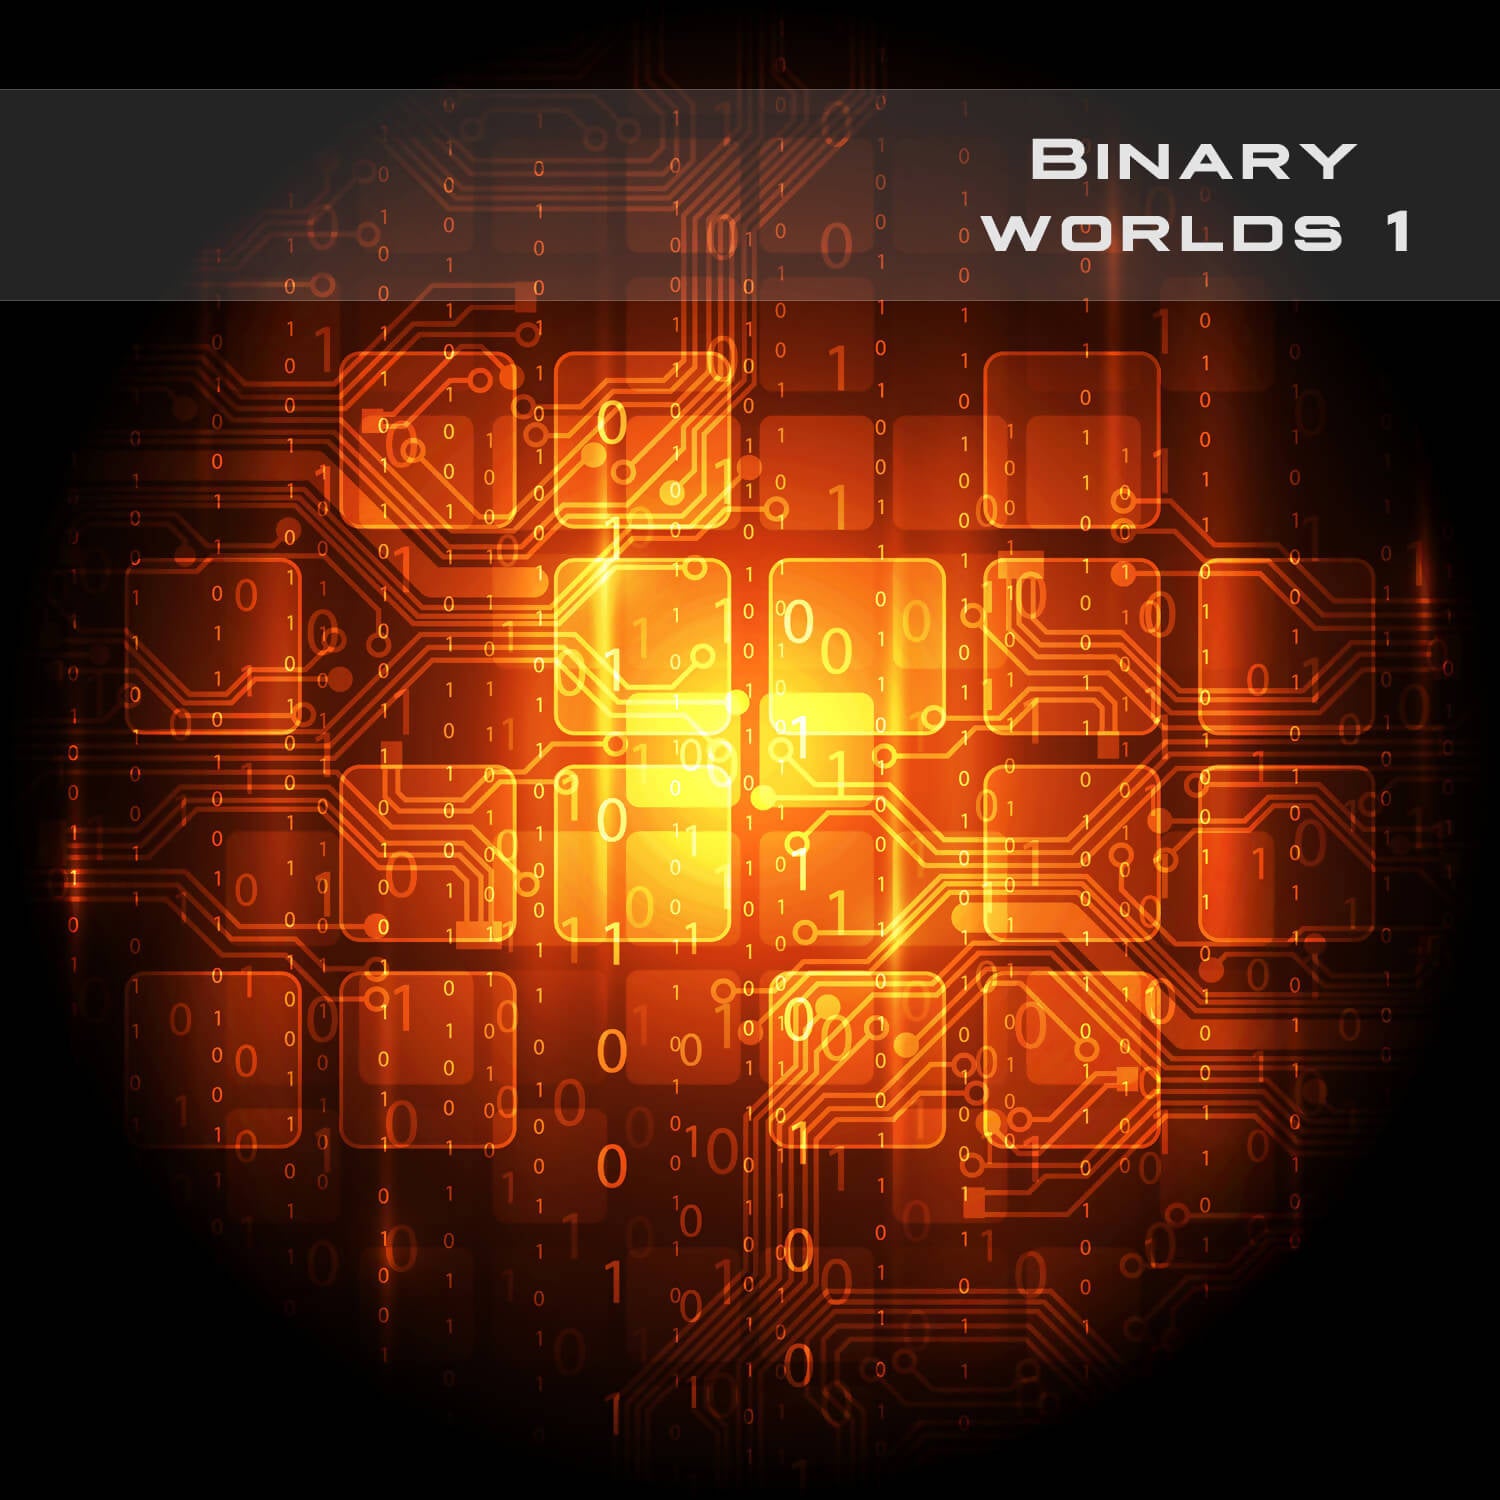 128 patches for spectrasonics Omnisphere 2 containing Binary Worlds Volume 1 is an extraordinary soundest containing immersive futuristic soundscapes, strange glitched out noises, quantum worlds of sound, alien soundscapes, shimmering pads, dystopian synth sounds, echoes from outer space & constantly evolving aural oddities